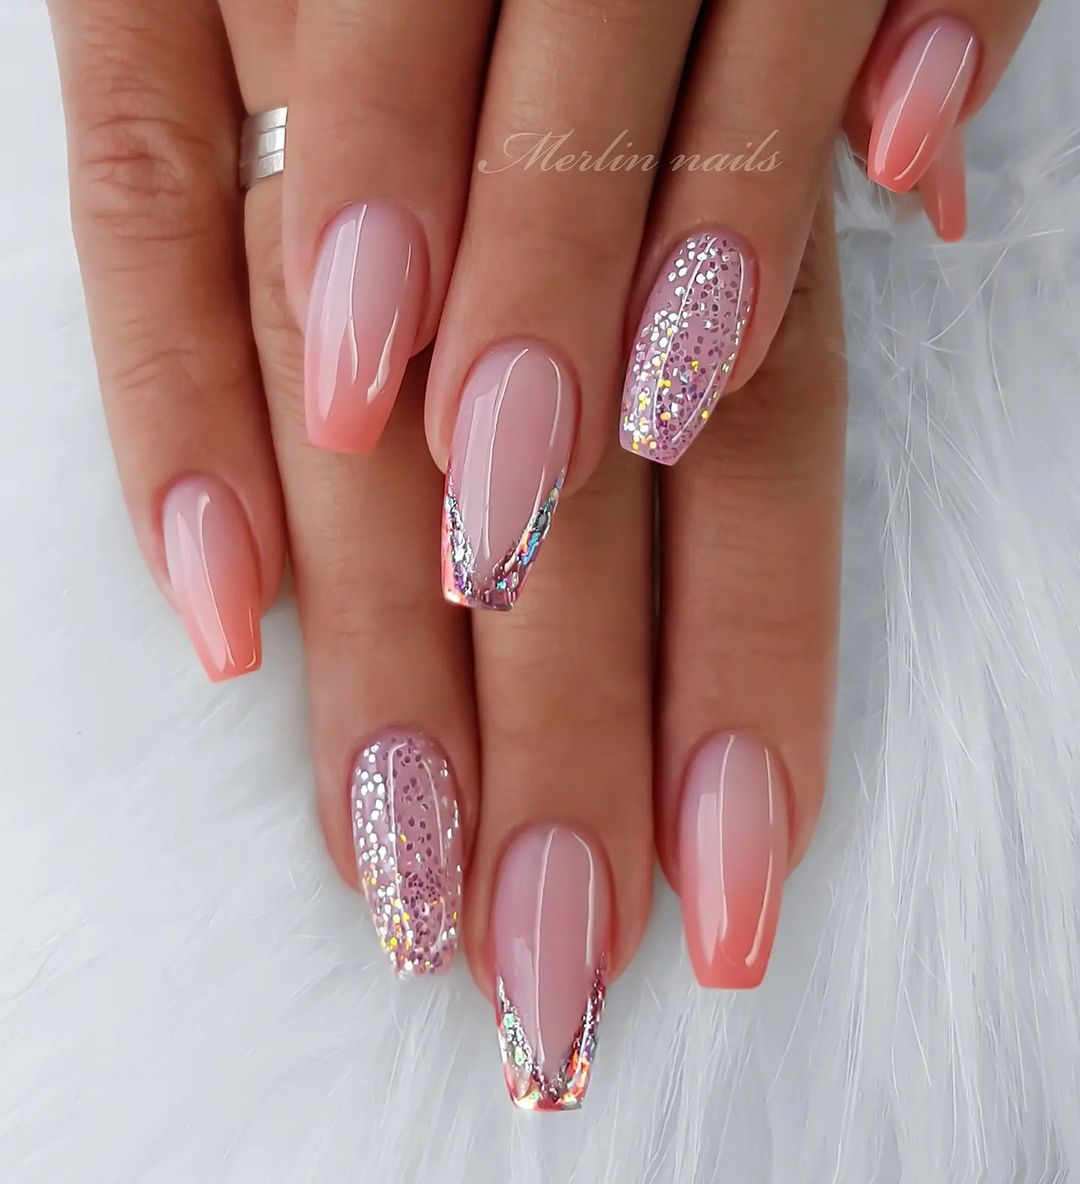 French Ombre Nails with Gold Glitter